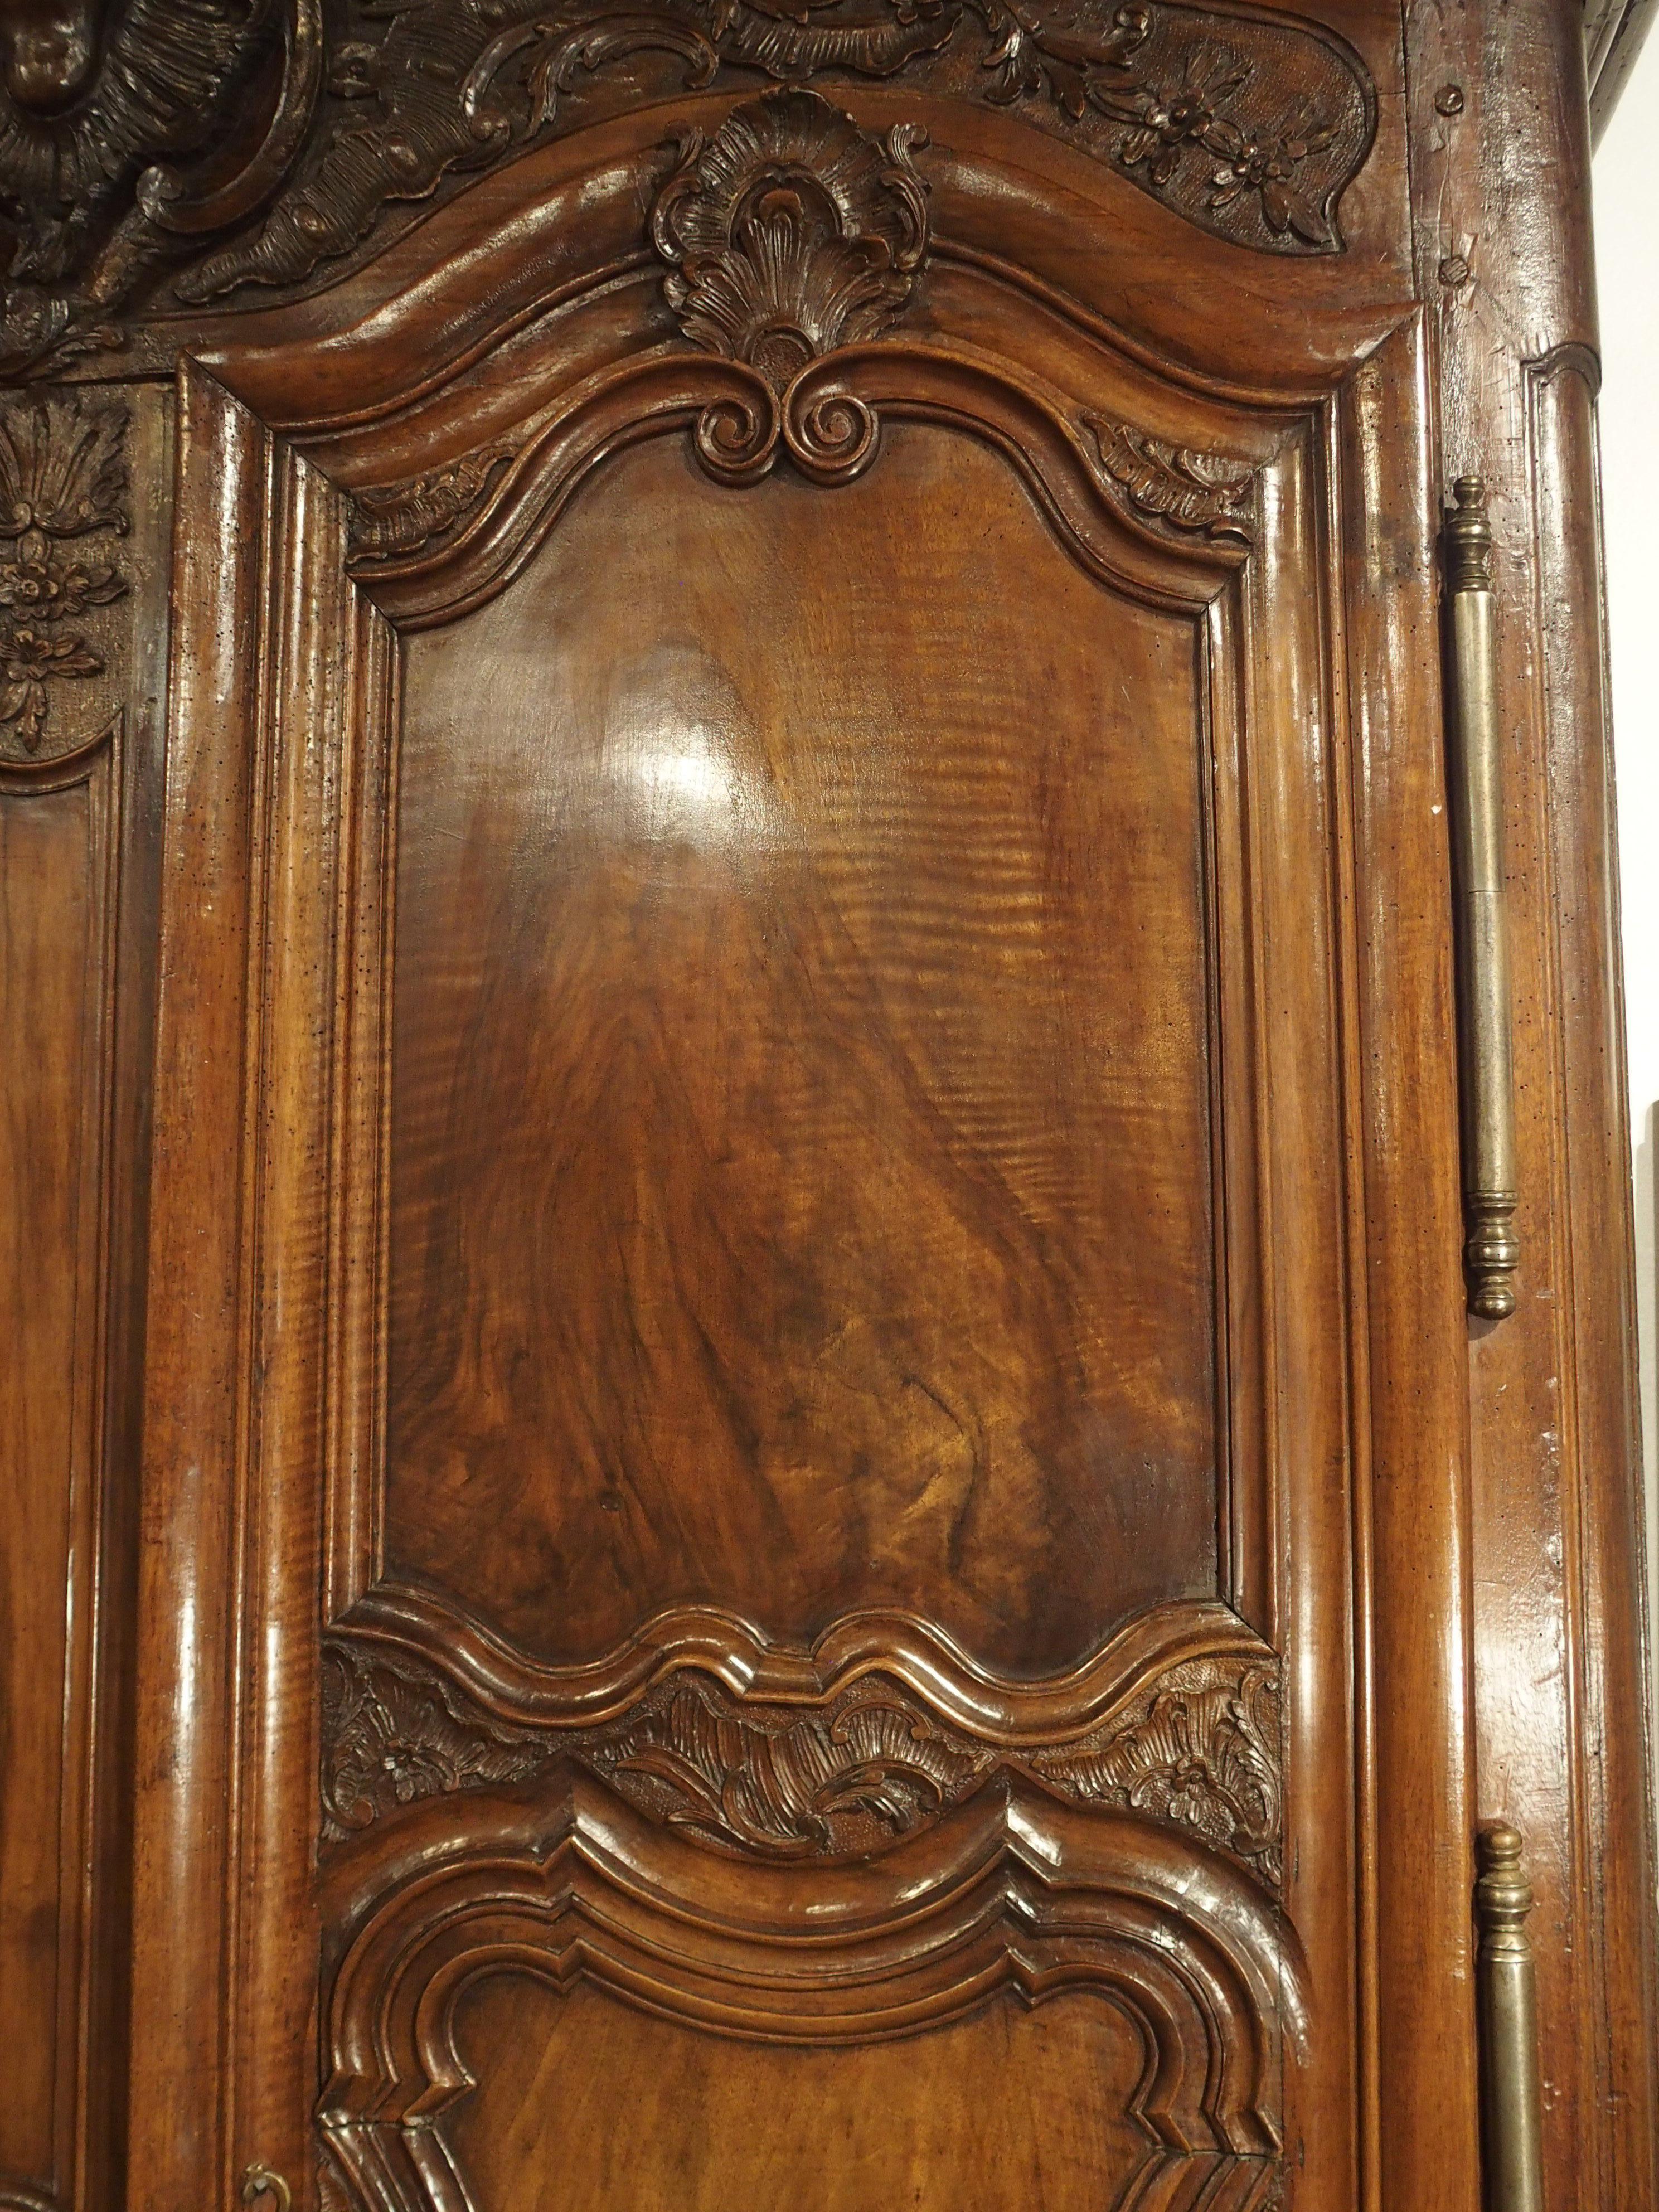 This fantastic walnut wood armoire was hand-carved in Lyon (southeast France) in the 1700’s. 18th century armoires from Lyon are quite distinct, thanks to techniques used by ebenistes to make their furniture standout from other woodworkers